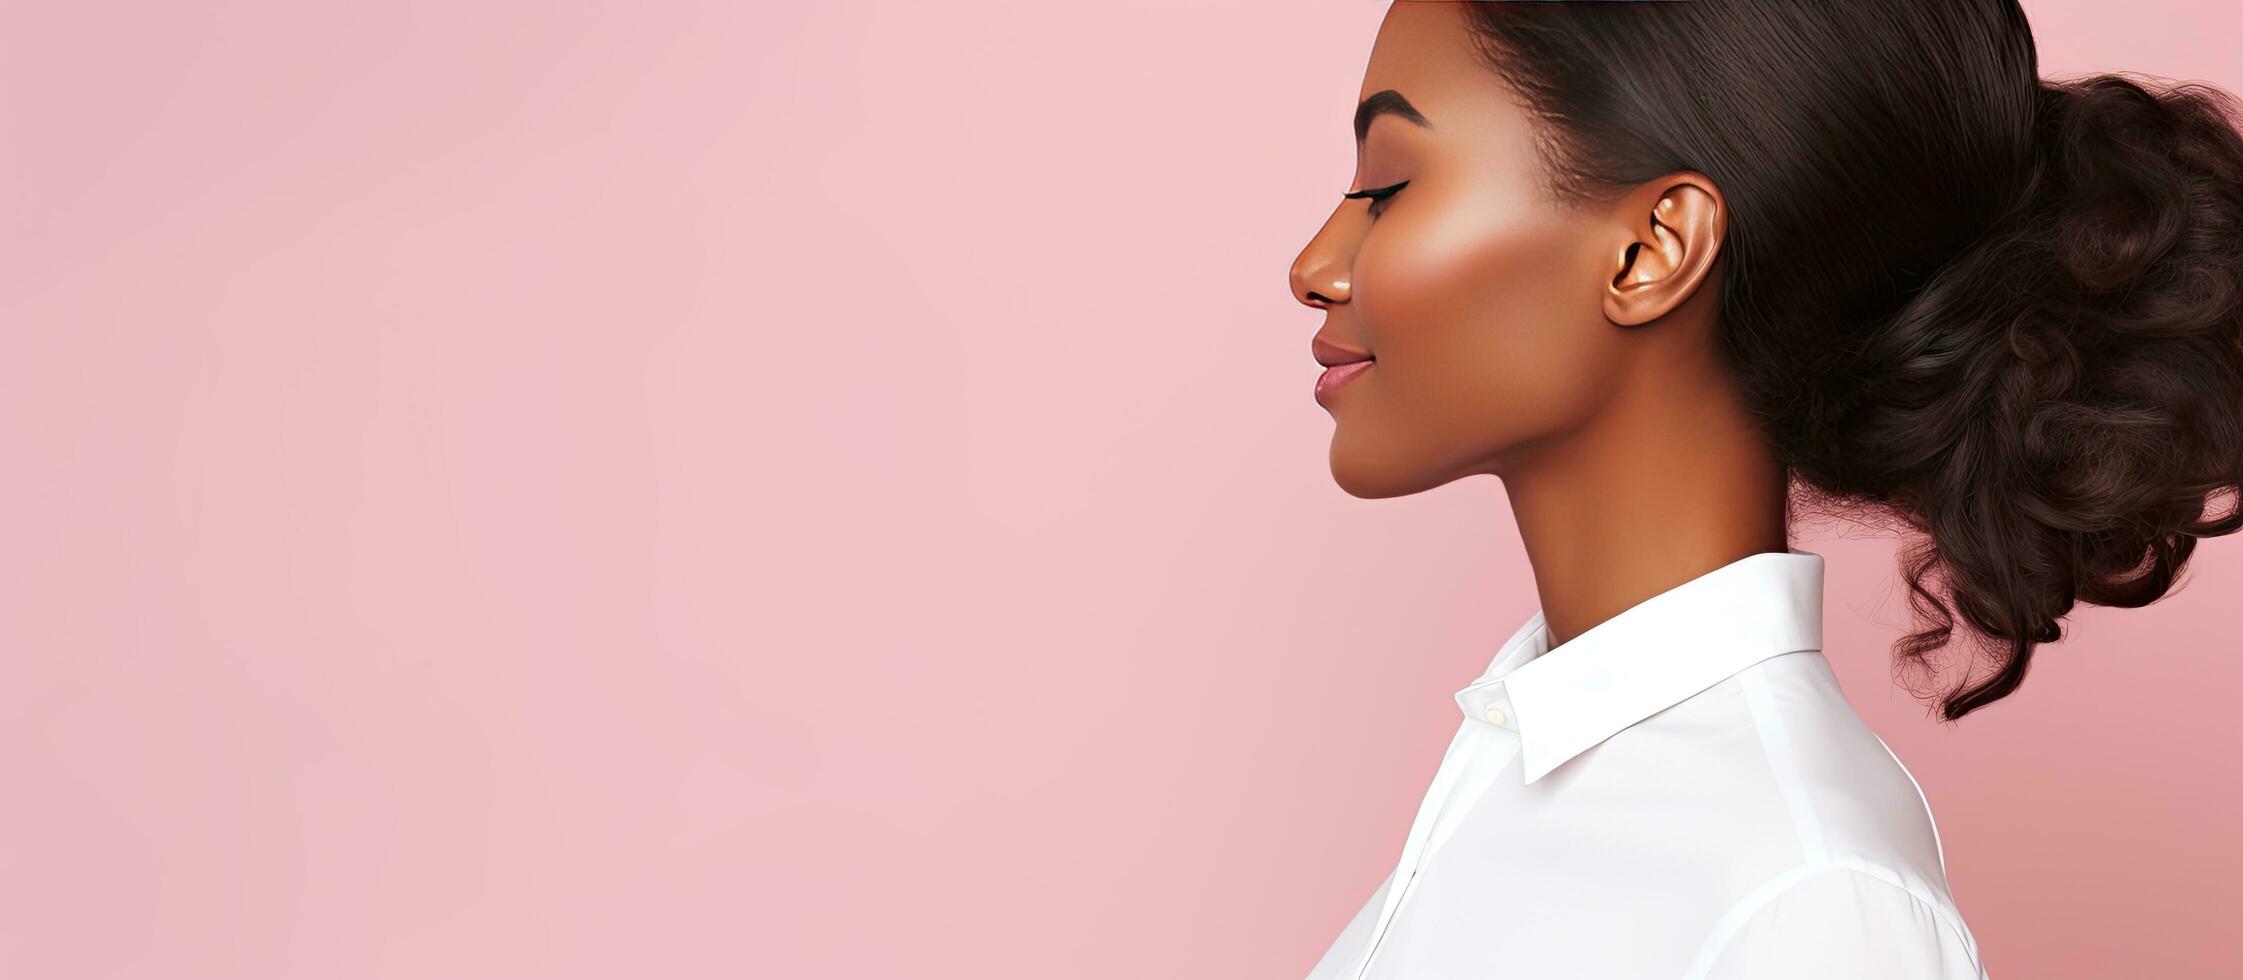 Close up portrait of an elegant African American woman in a classic white shirt posing in a studio on a pink background with an empty space for text photo